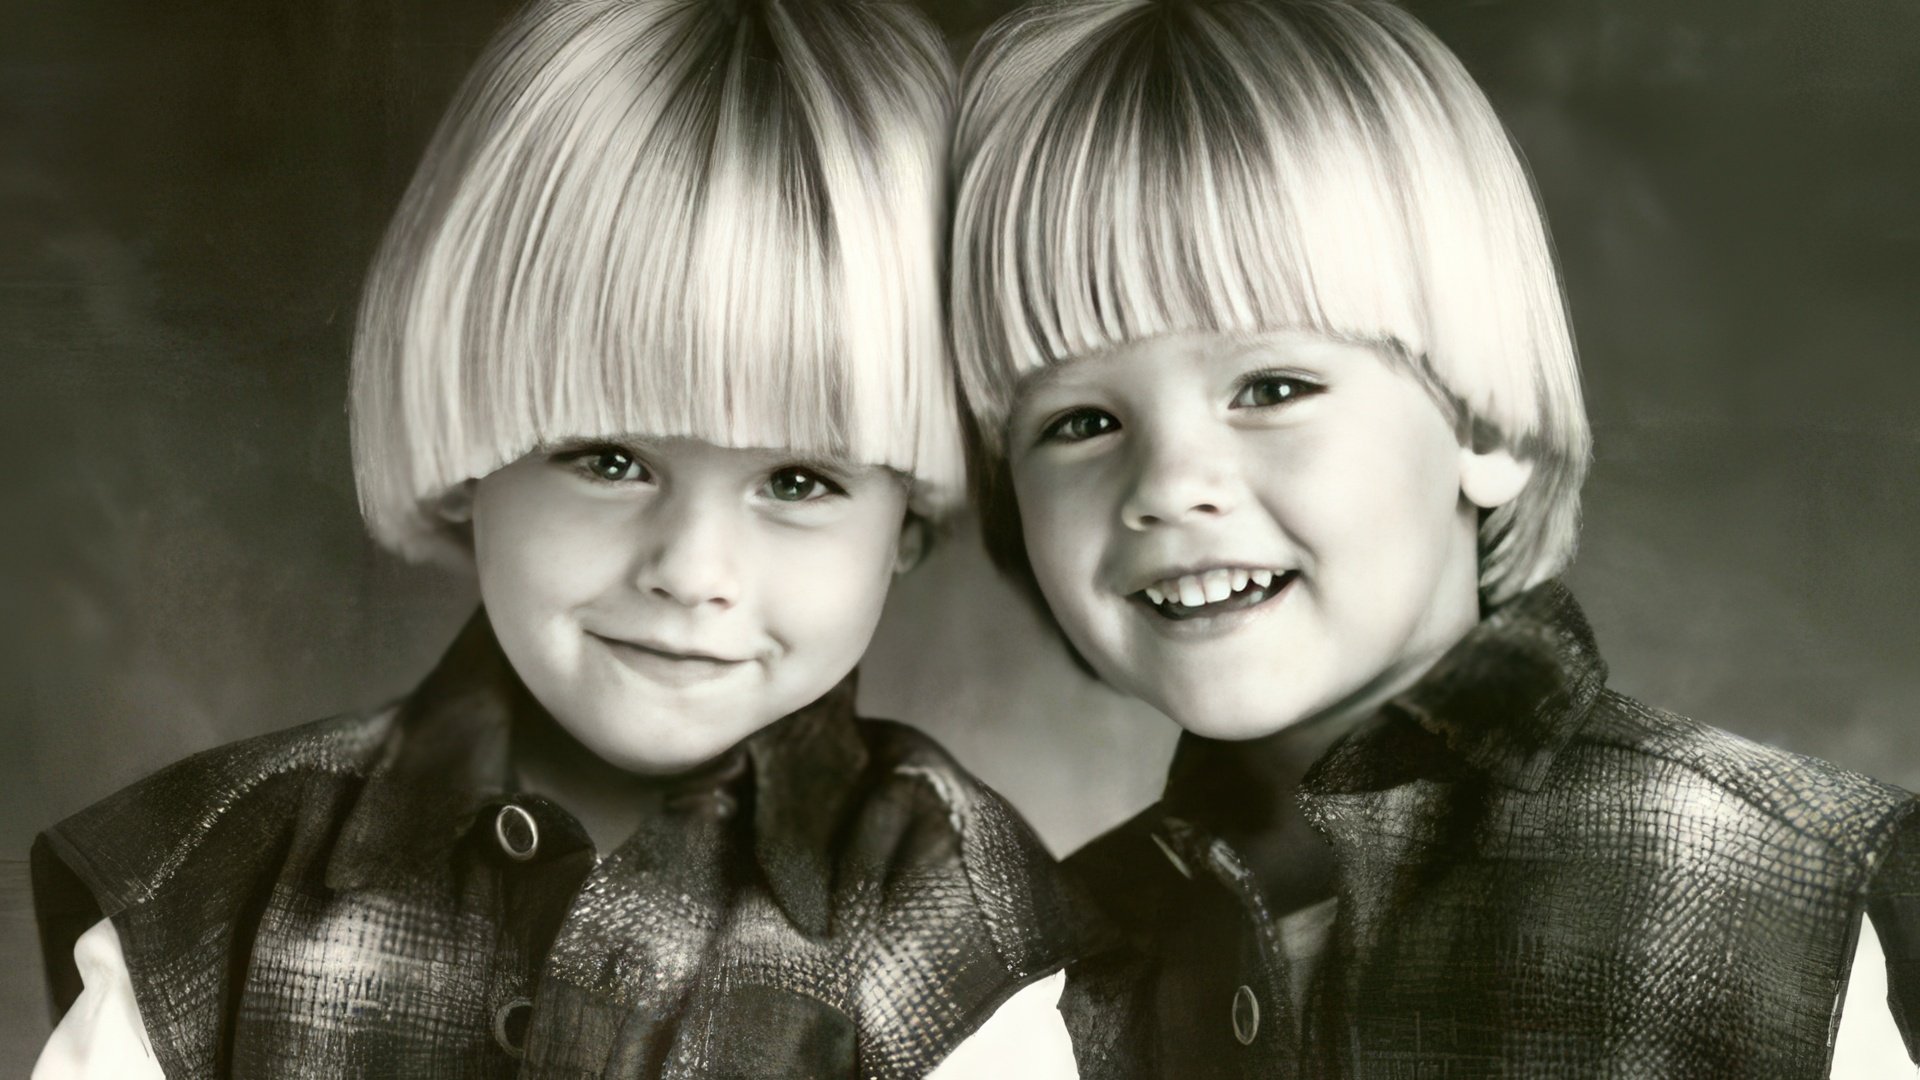 Cole Sprouse and his brother Dylan Sprouse in his childhood